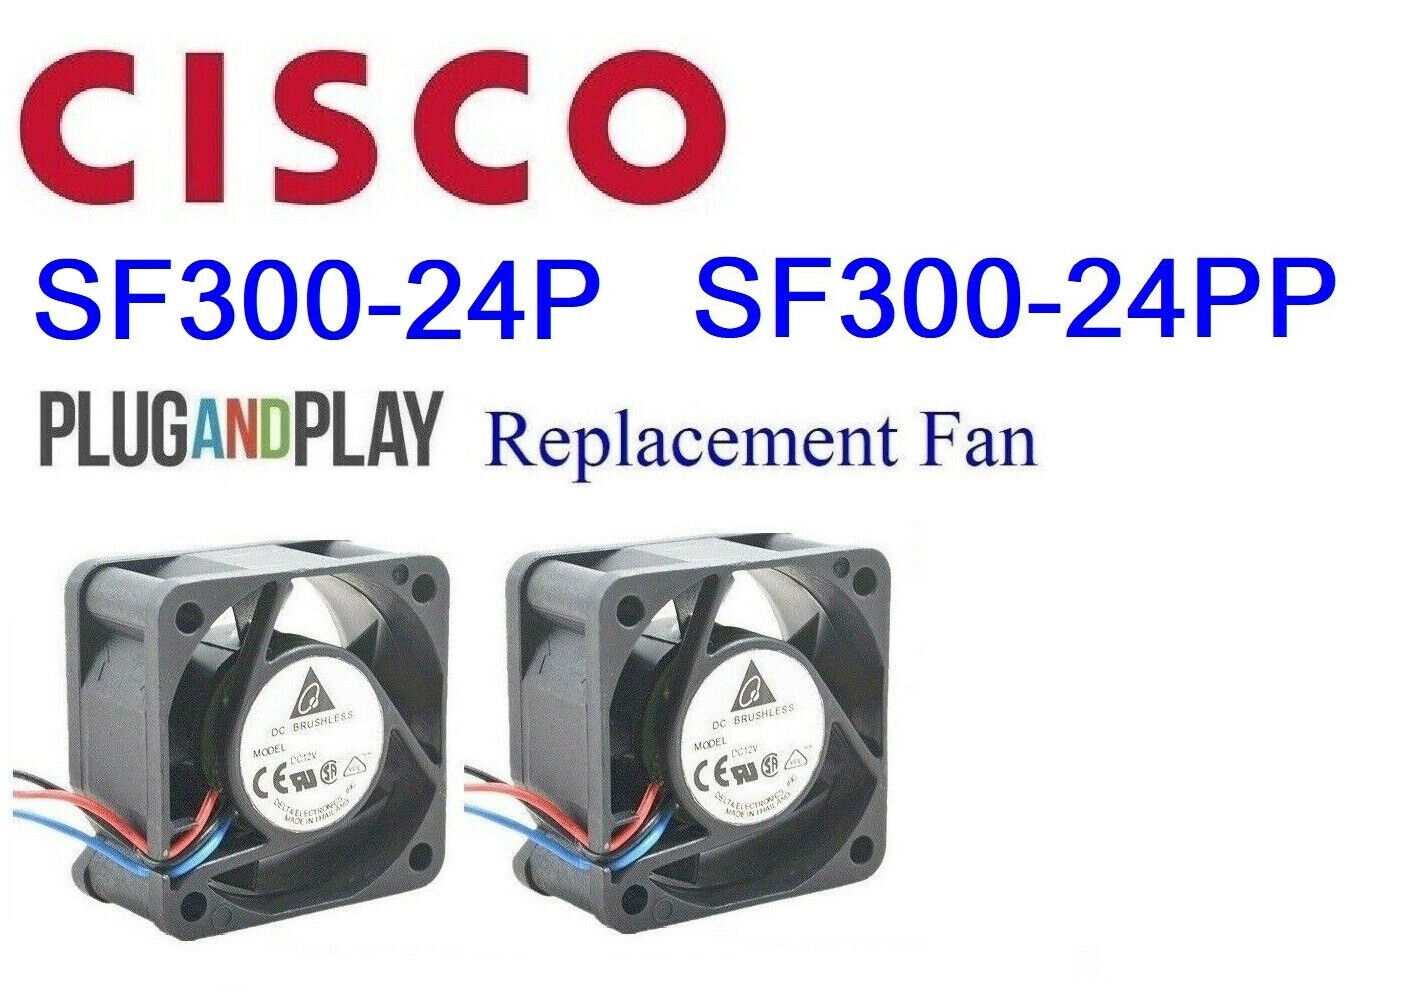 2x Replacement fans for Cisco SF300-24P, SF300-24PP